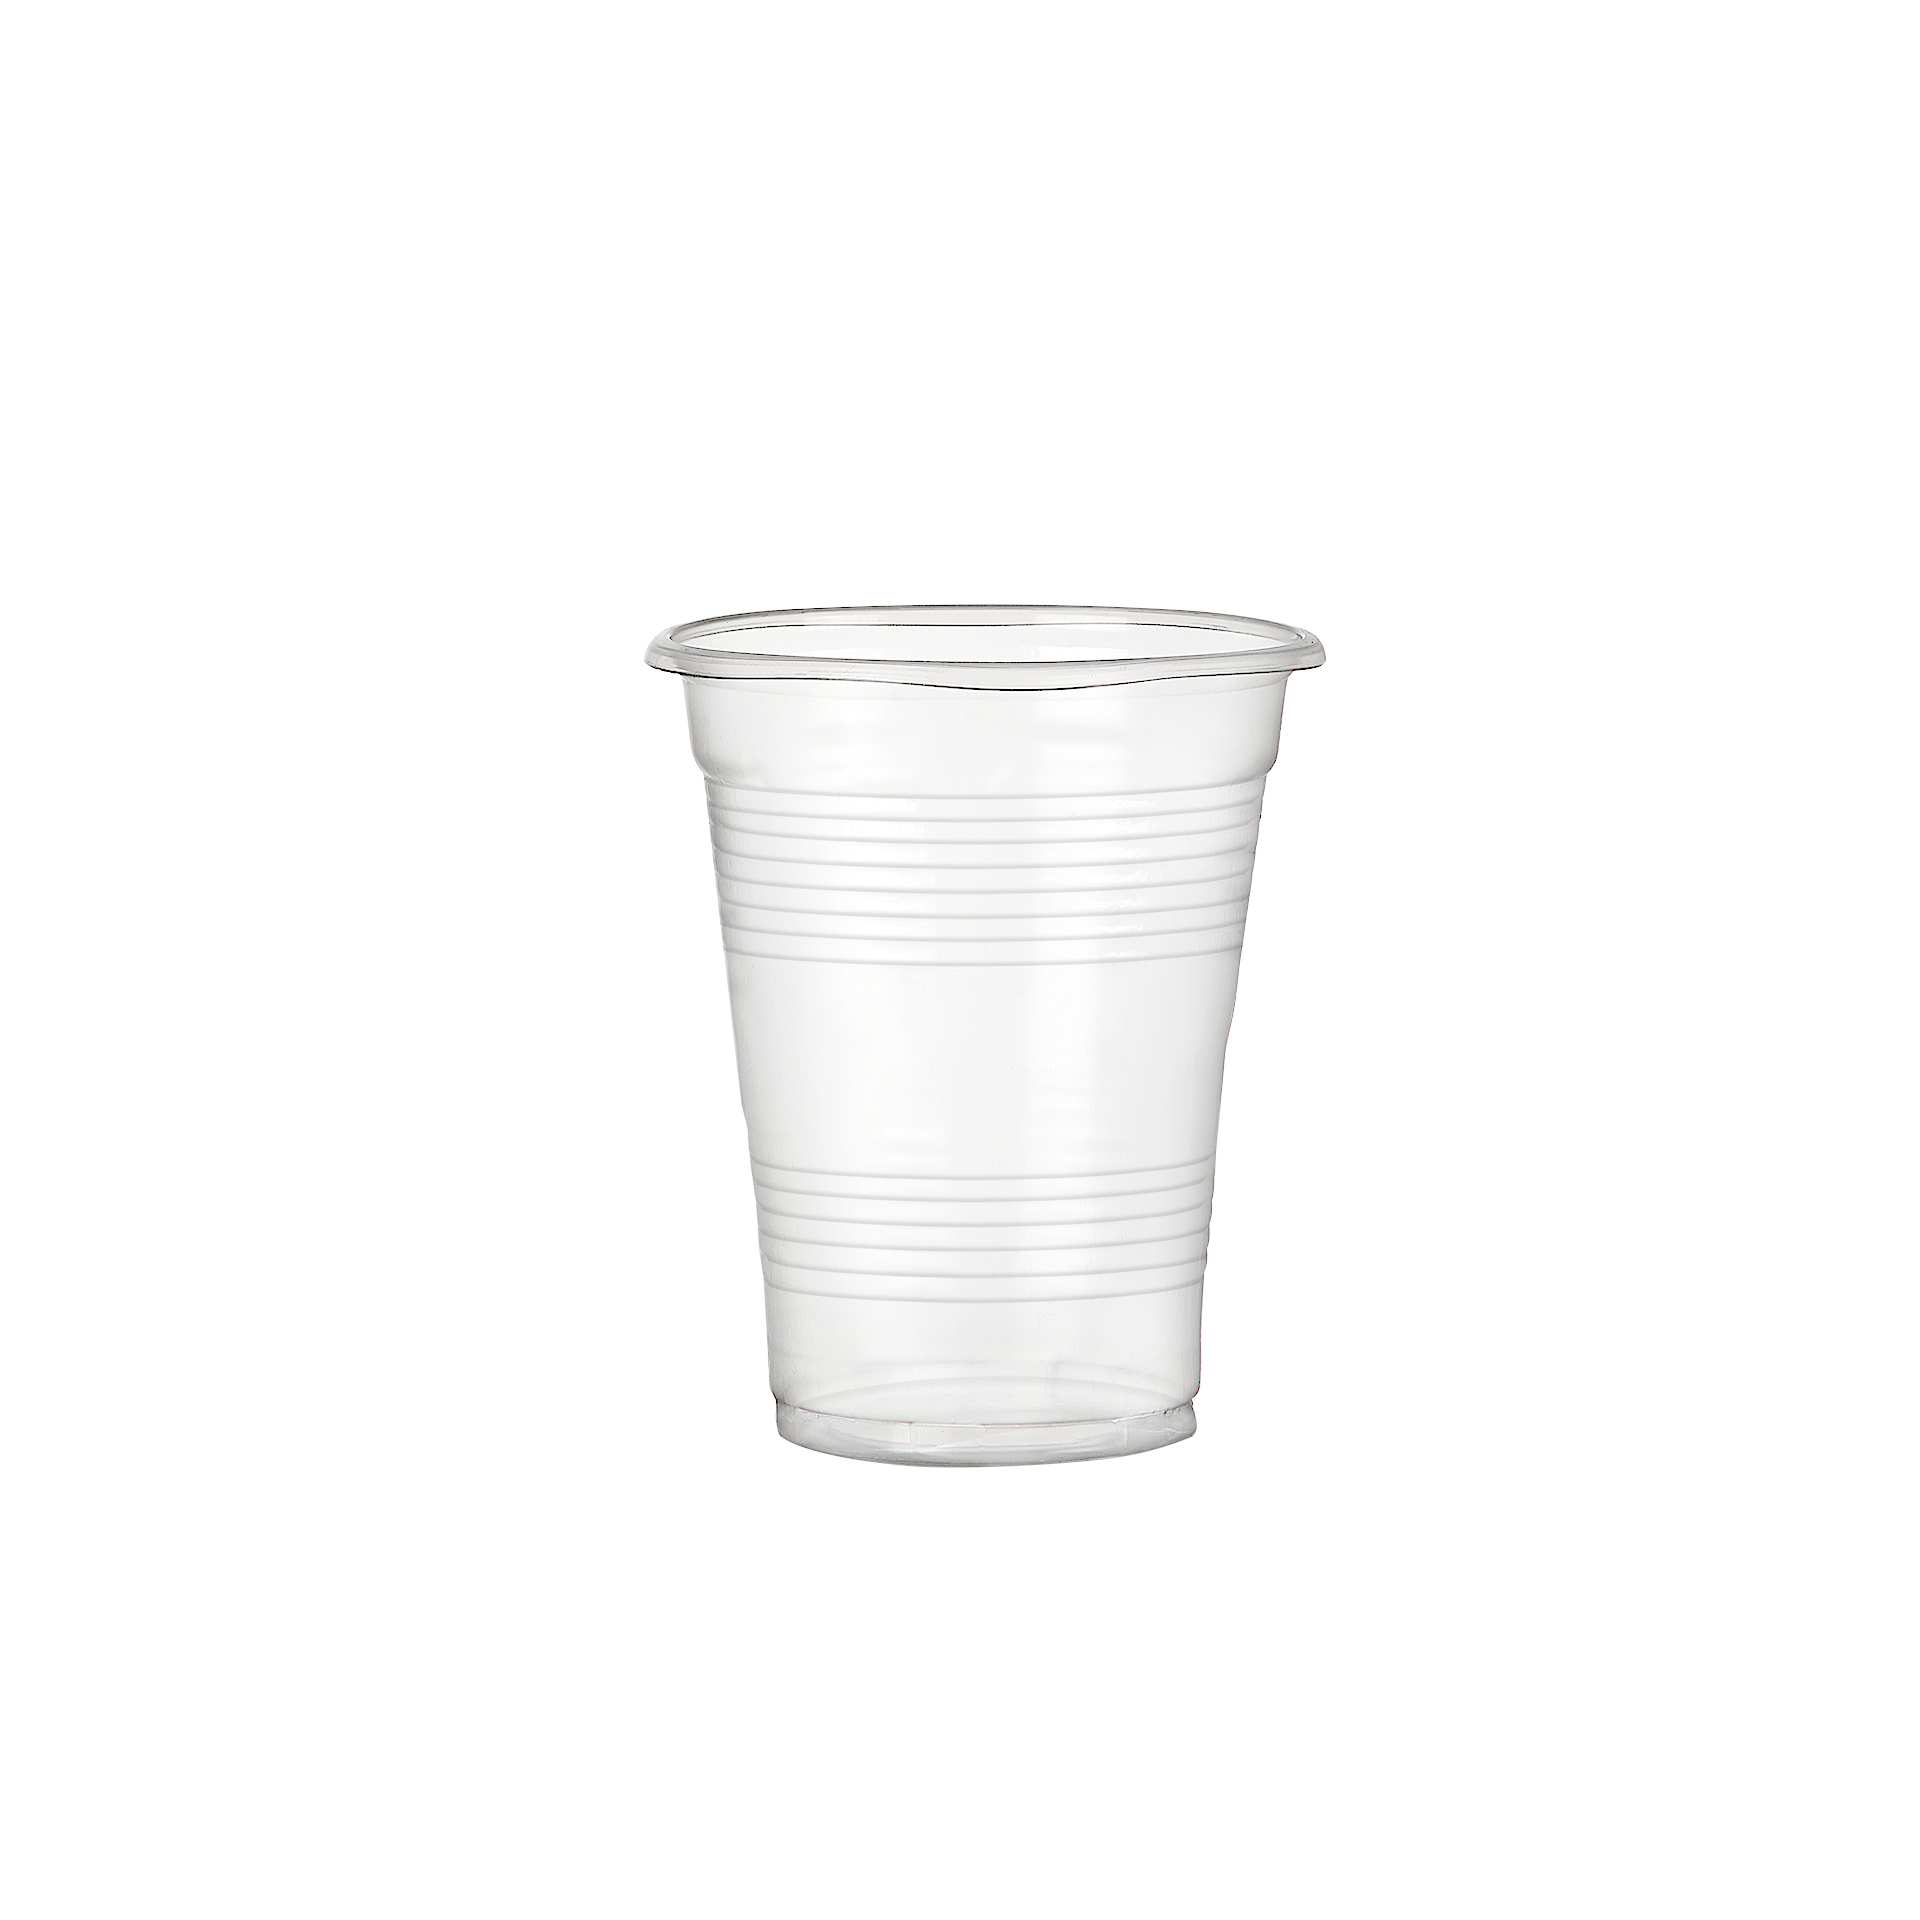 180 CC PP CUP (WATER CUP) - brc00146